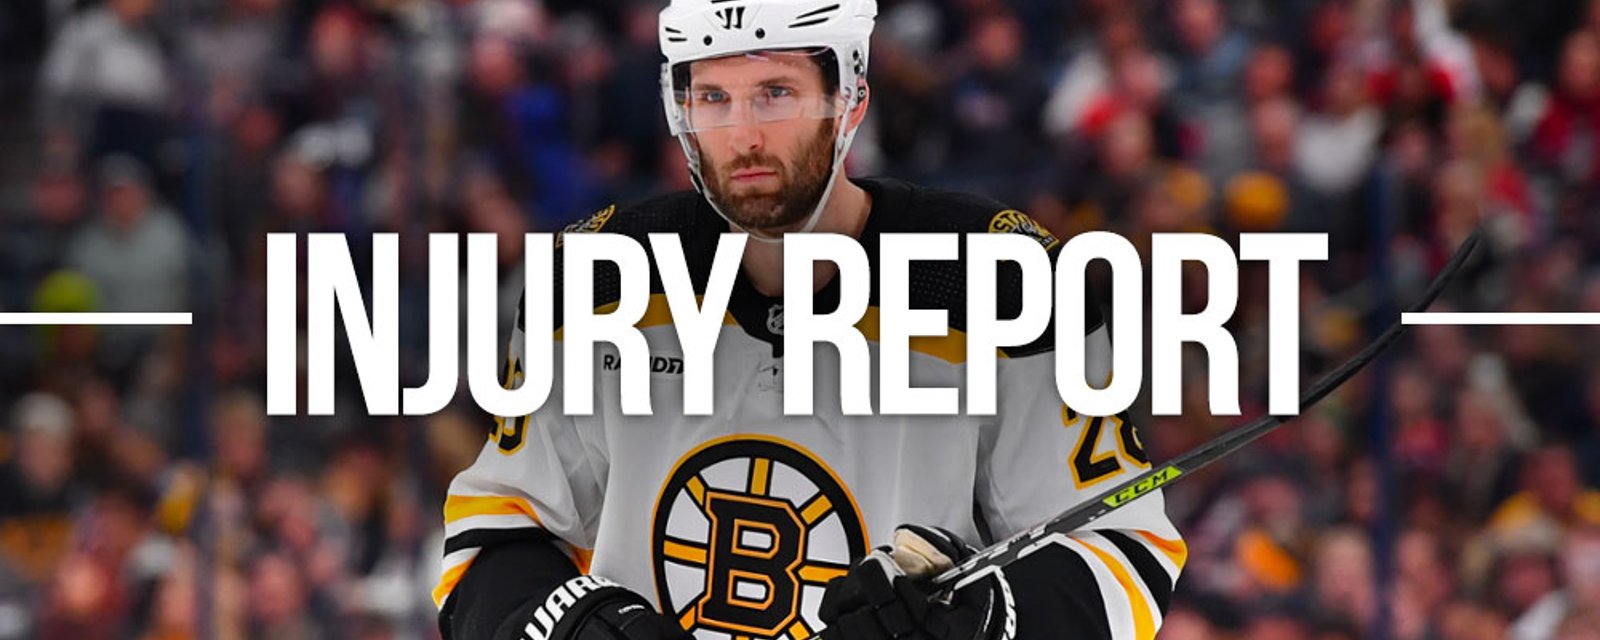 Bruins lose Forbort for the rest of the season